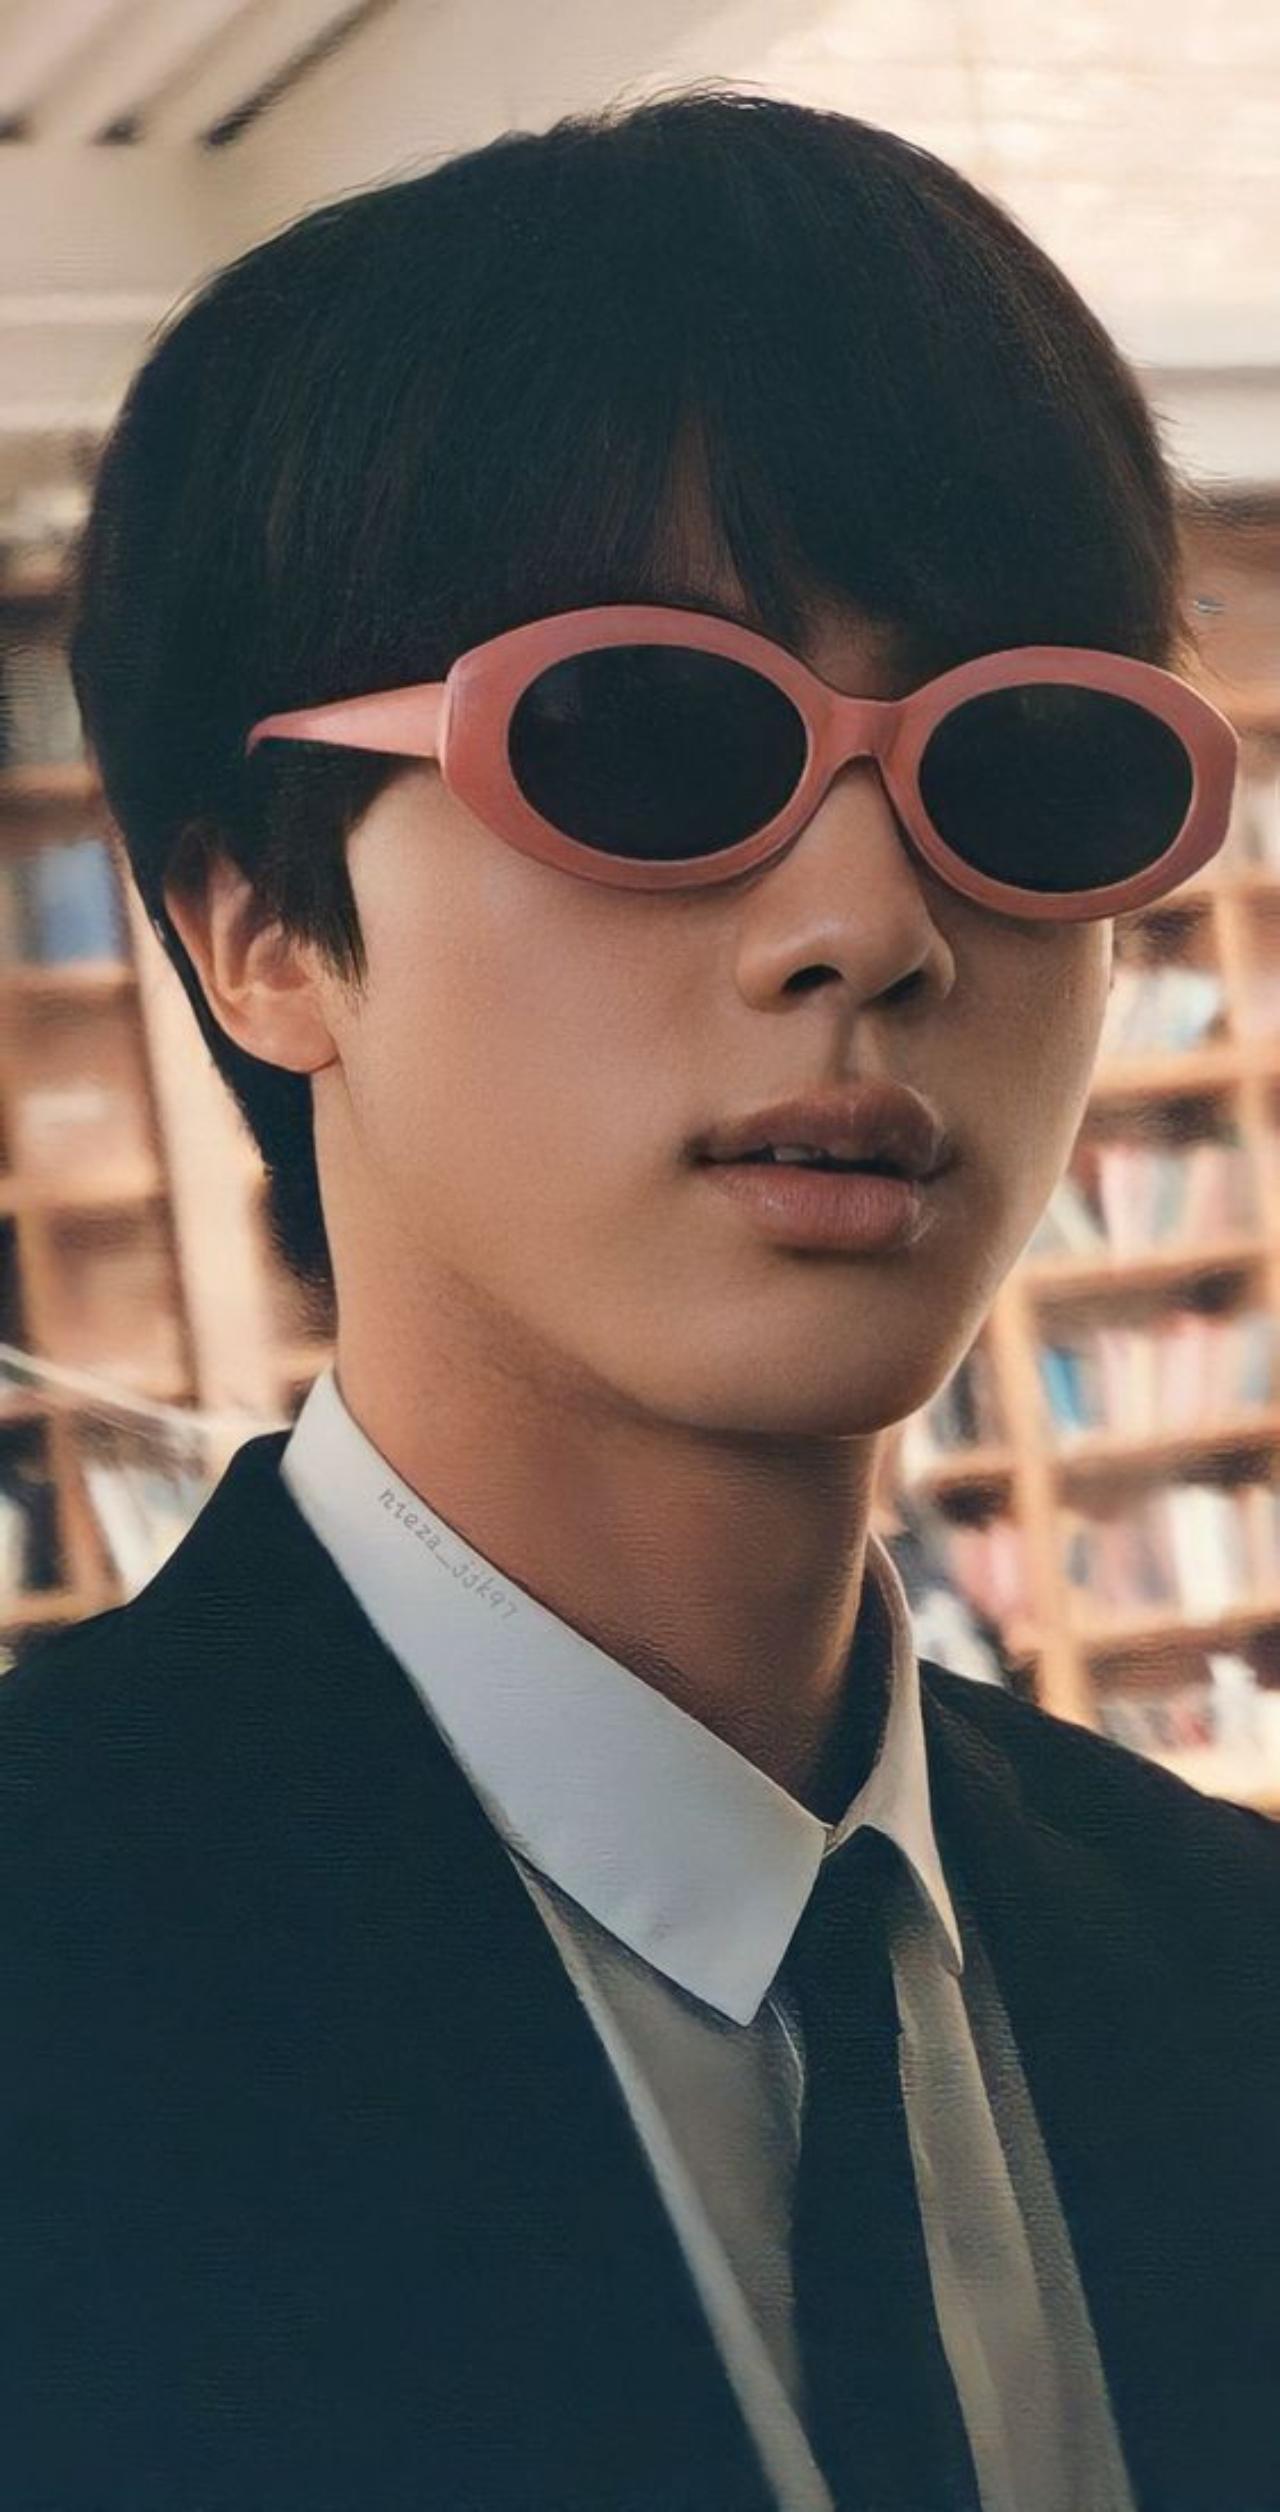 Kim Seokjin has a never-ending love affair for the most eccentric pairs of sunglasses. Not to mention his bowl cut makes him look even more hilarious!